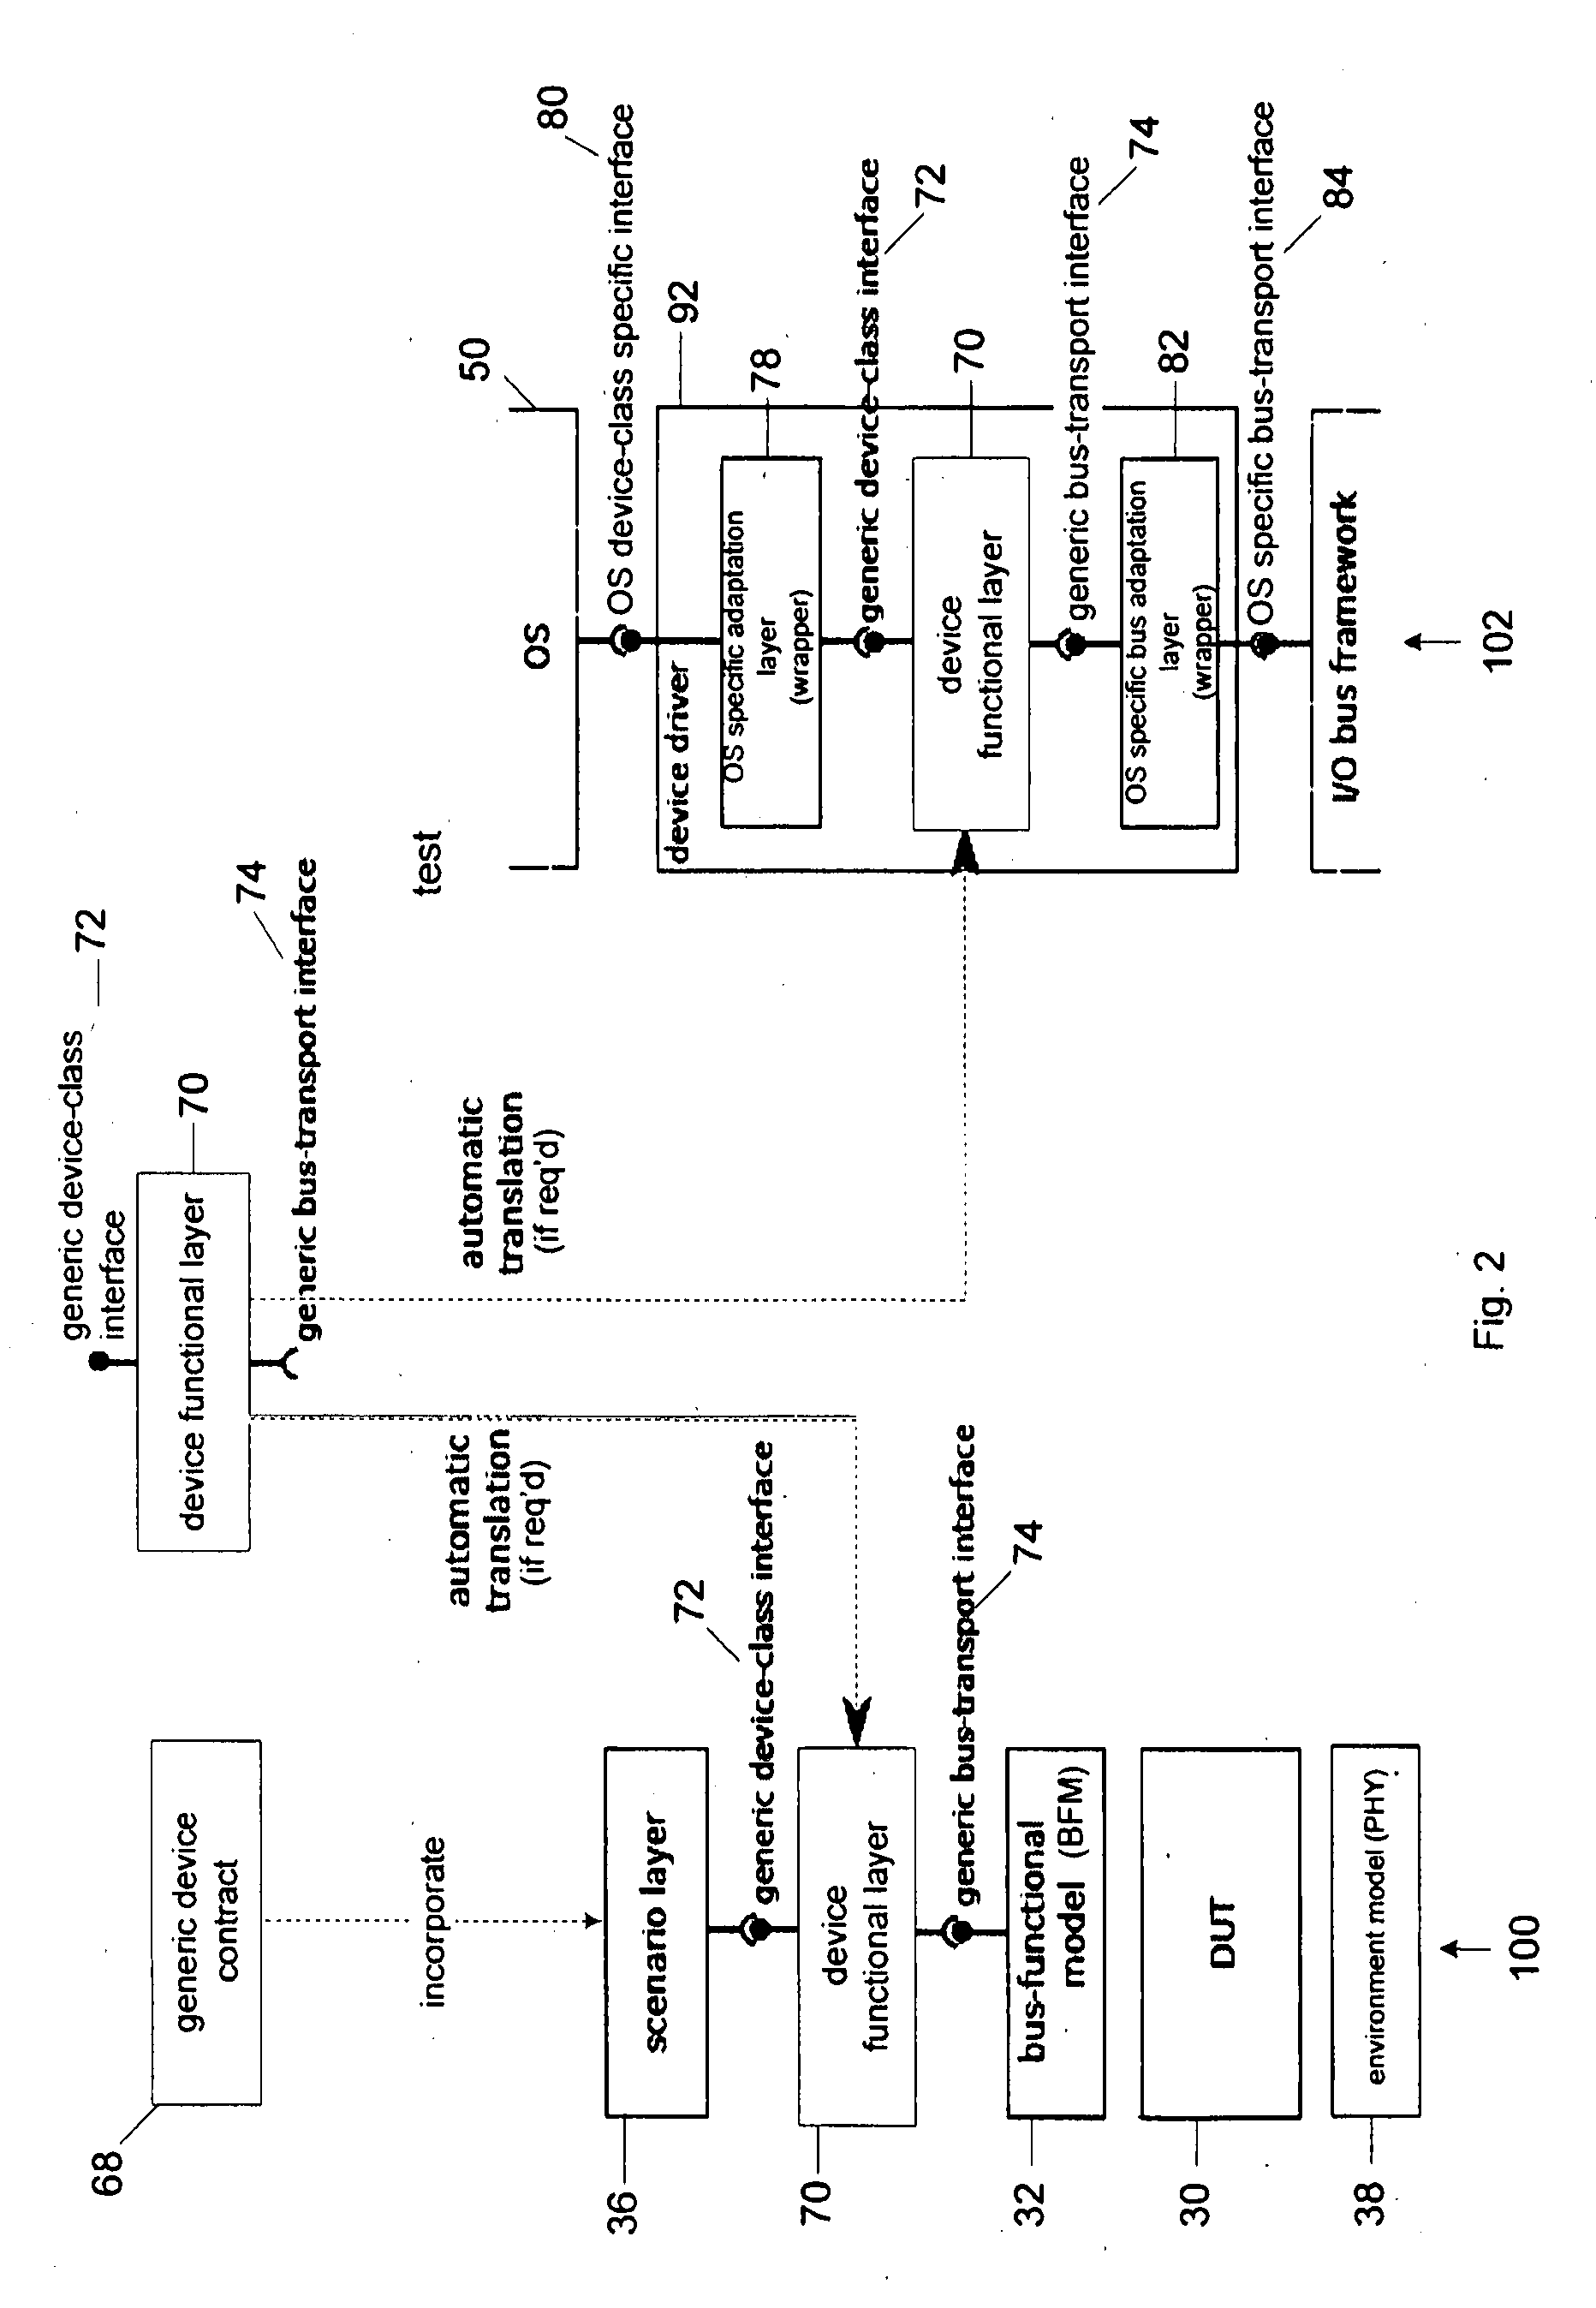 Co-design of a testbench and driver of a device